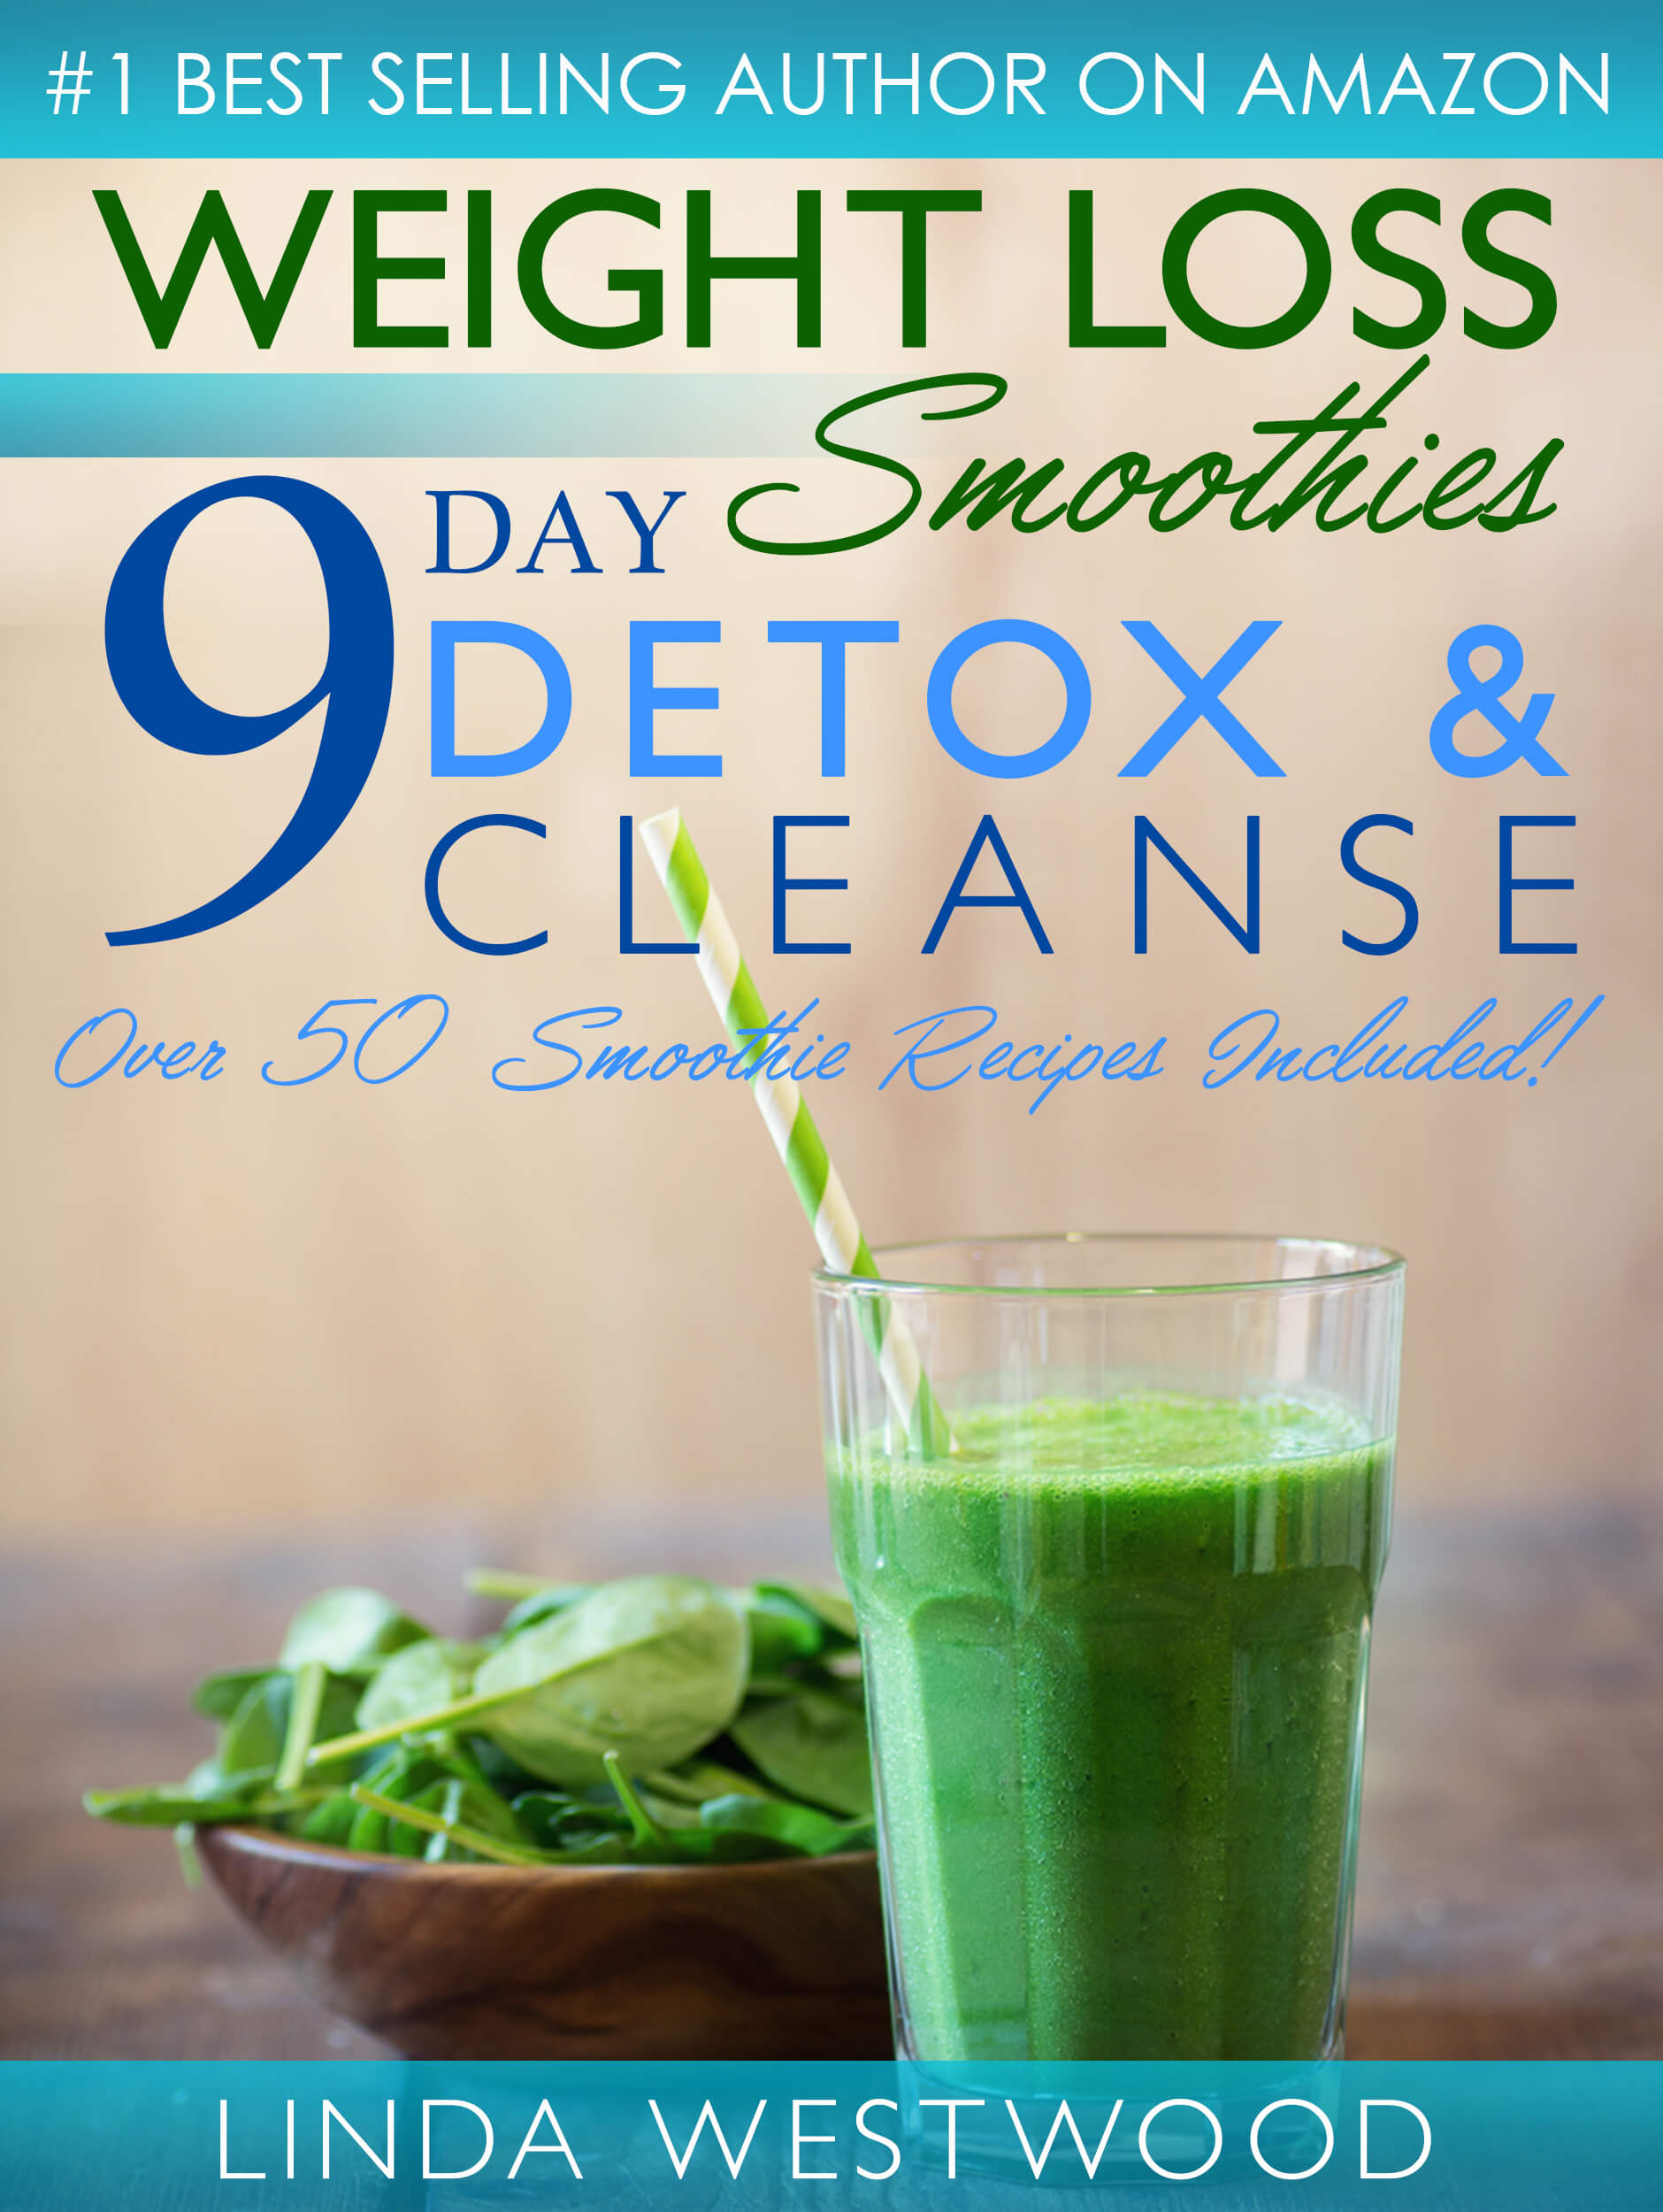 FREE: Weight Loss Smoothies (4th Edition): 9-Day Detox & Cleanse – Over 50 Recipes Included! by Linda Westwood